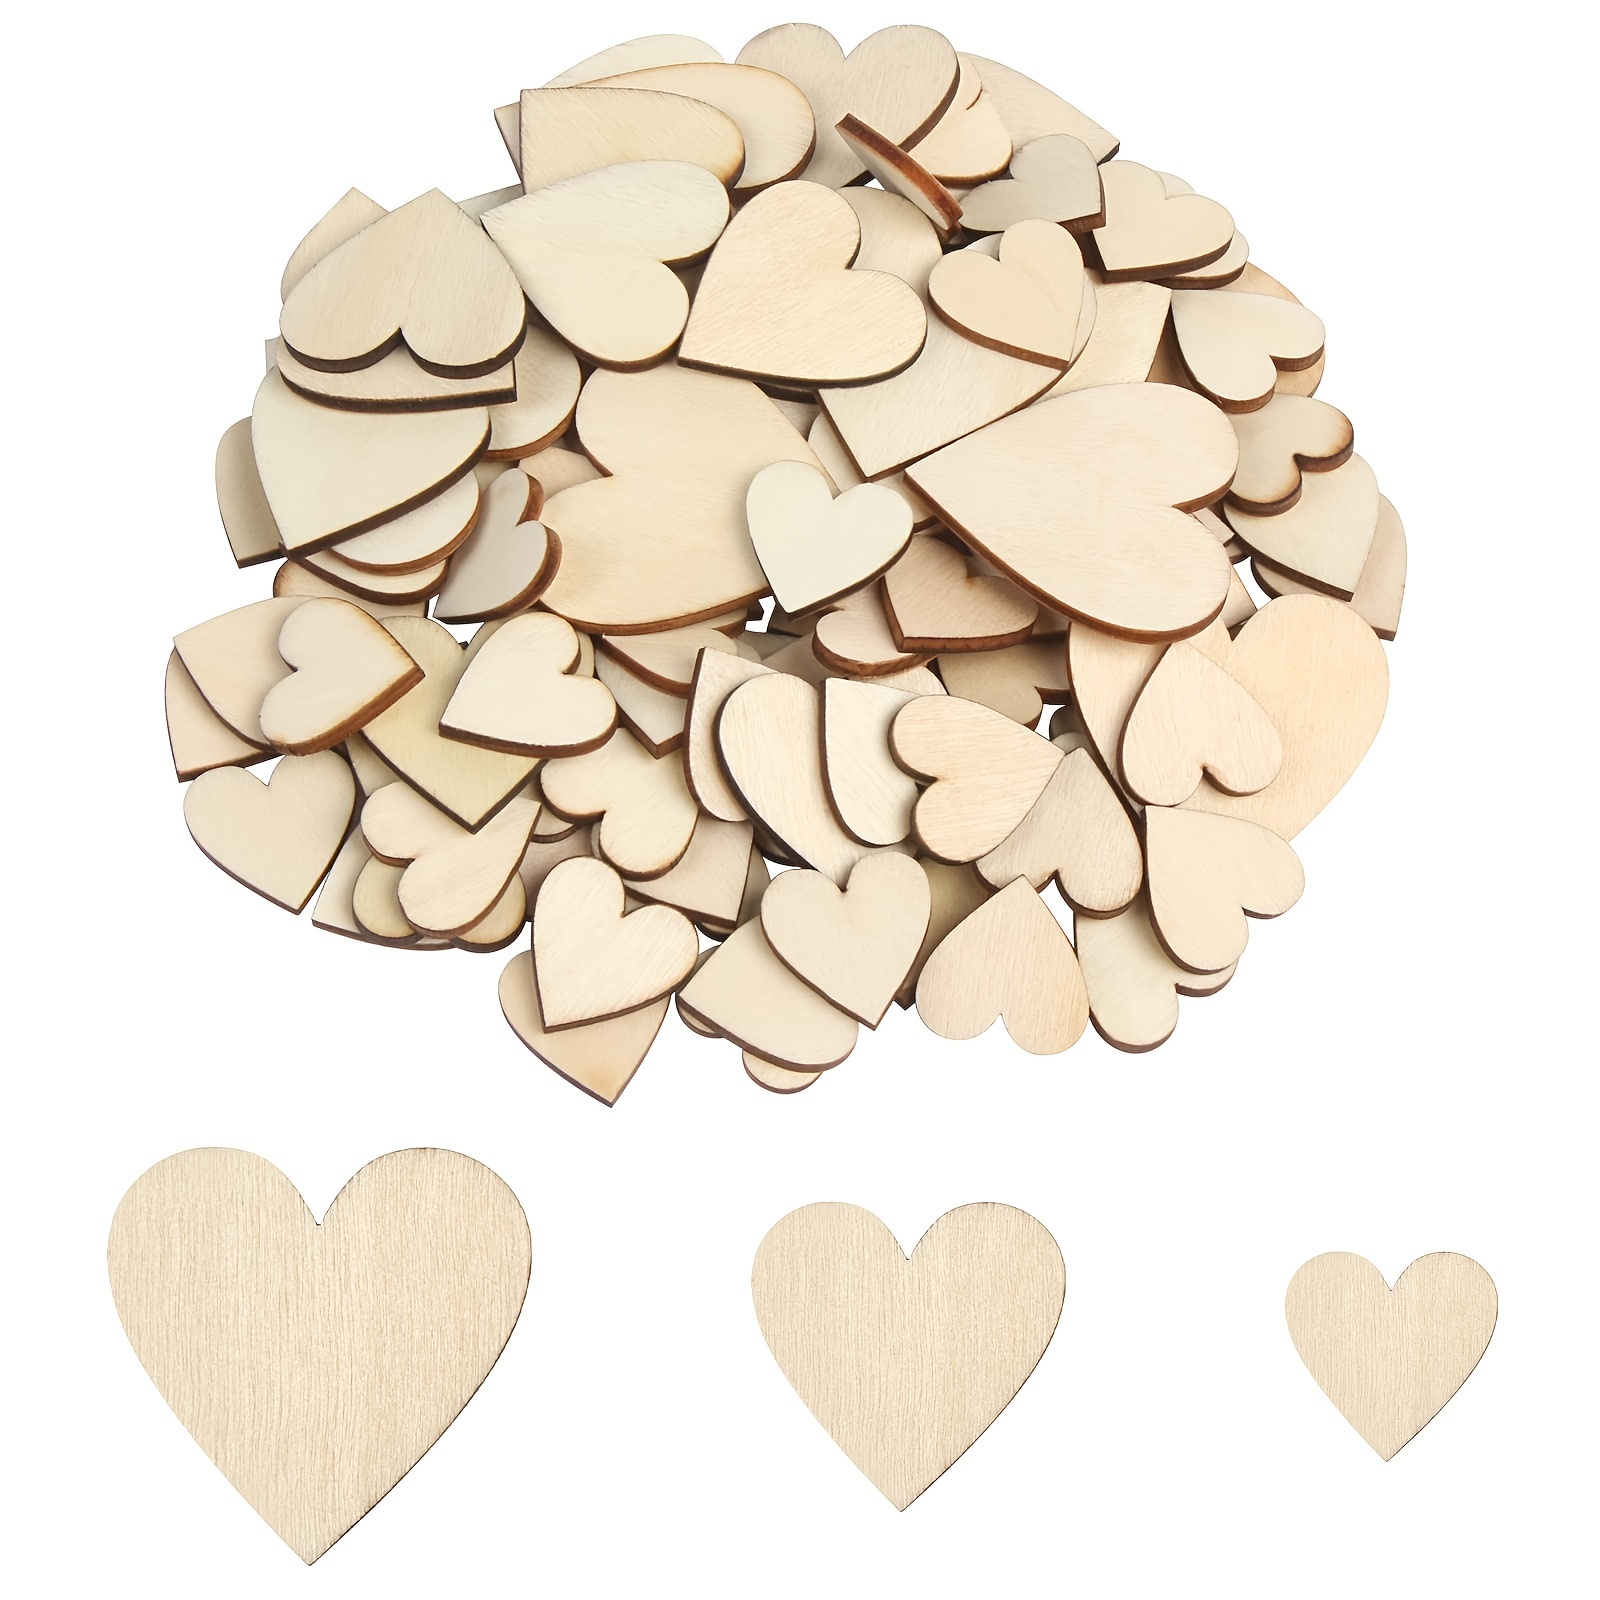 Shapenty Unfinished Blank Wooden Heart Shaped Slices Discs DIY Craft Pieces for Wedding Ornaments Christmas Party Embellishment, Pack of 100